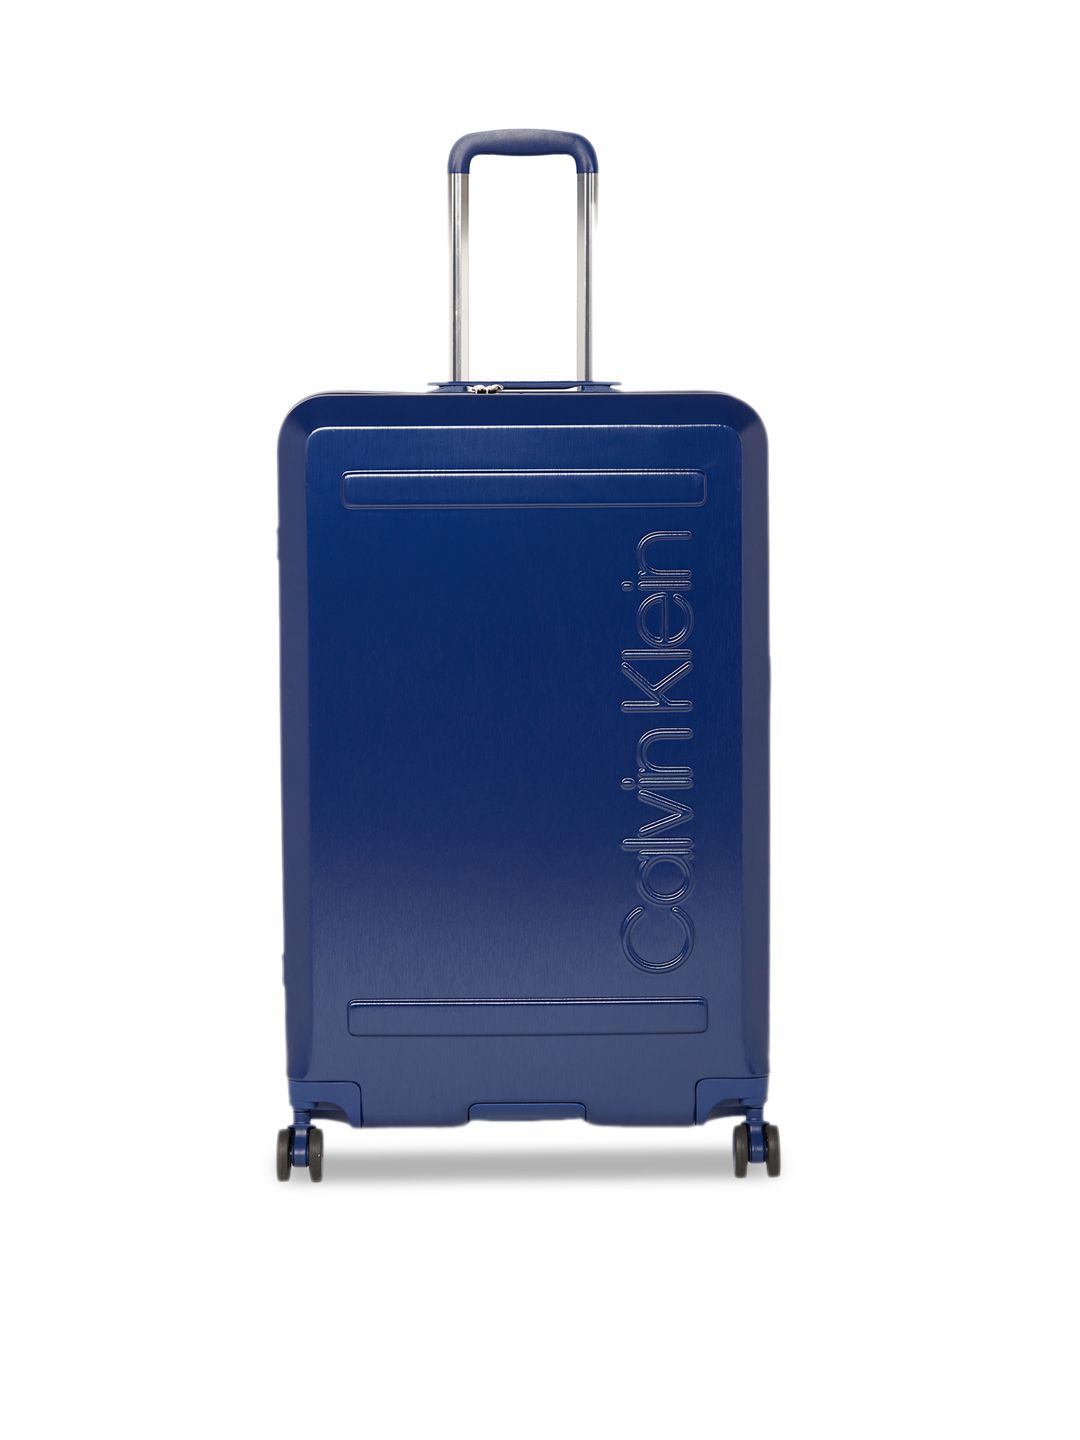 Calvin Klein Blue Soho 360-Degree Rotation Hard-Sided Large Trolley Suitcase Price in India